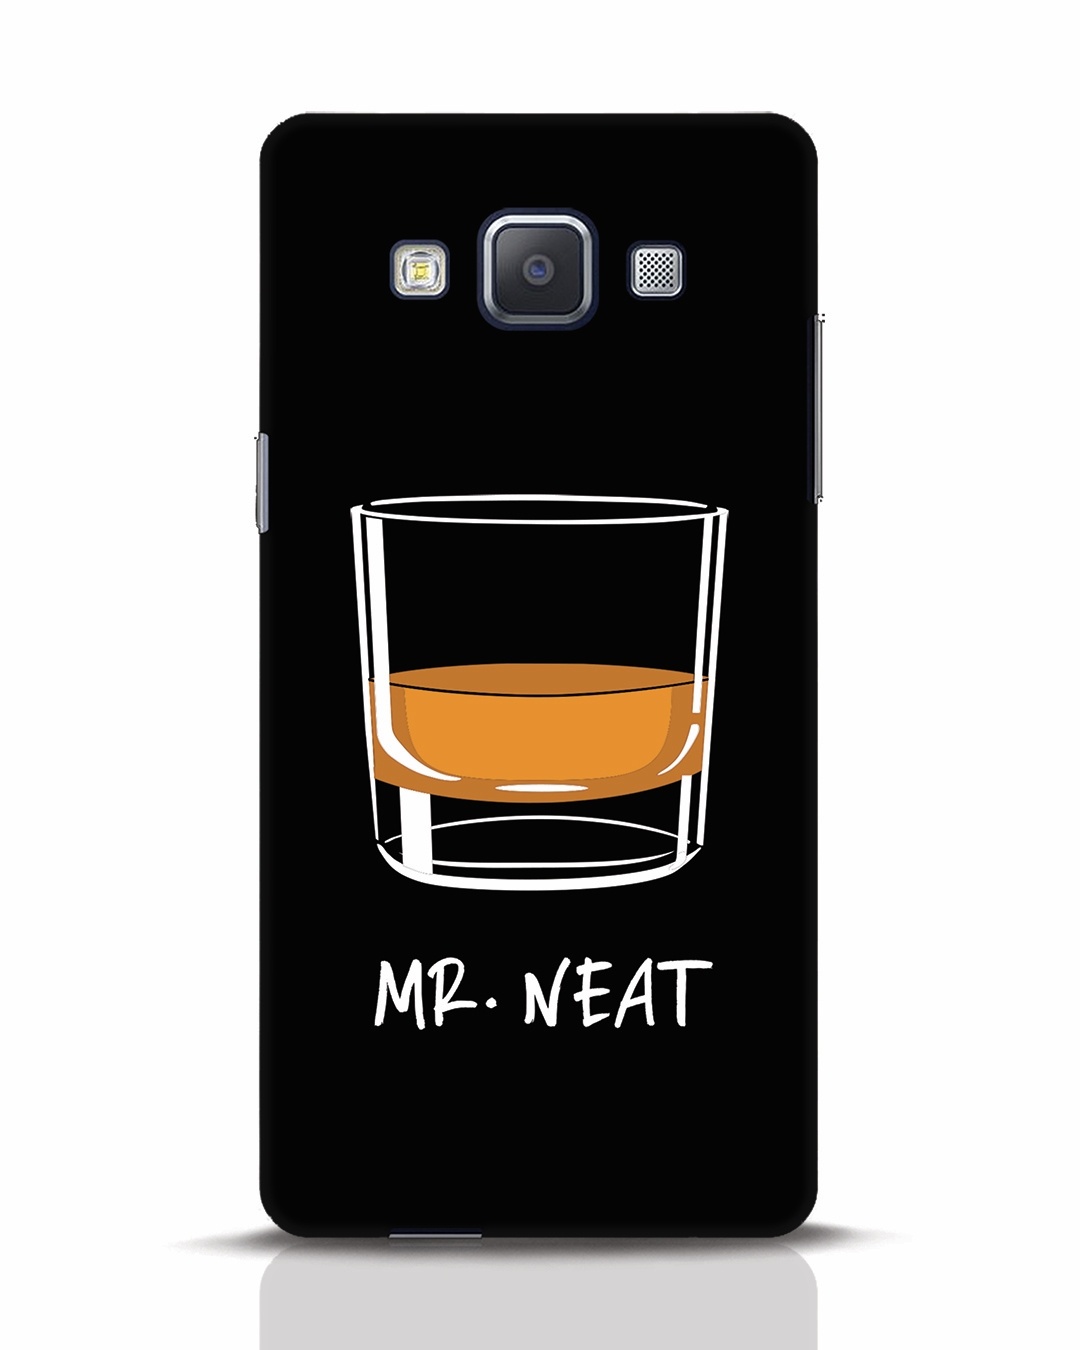 Mr.neat Samsung Galaxy A5 Mobile Cover  Samsung Galaxy A5 Mobile Covers Bewakoof.com